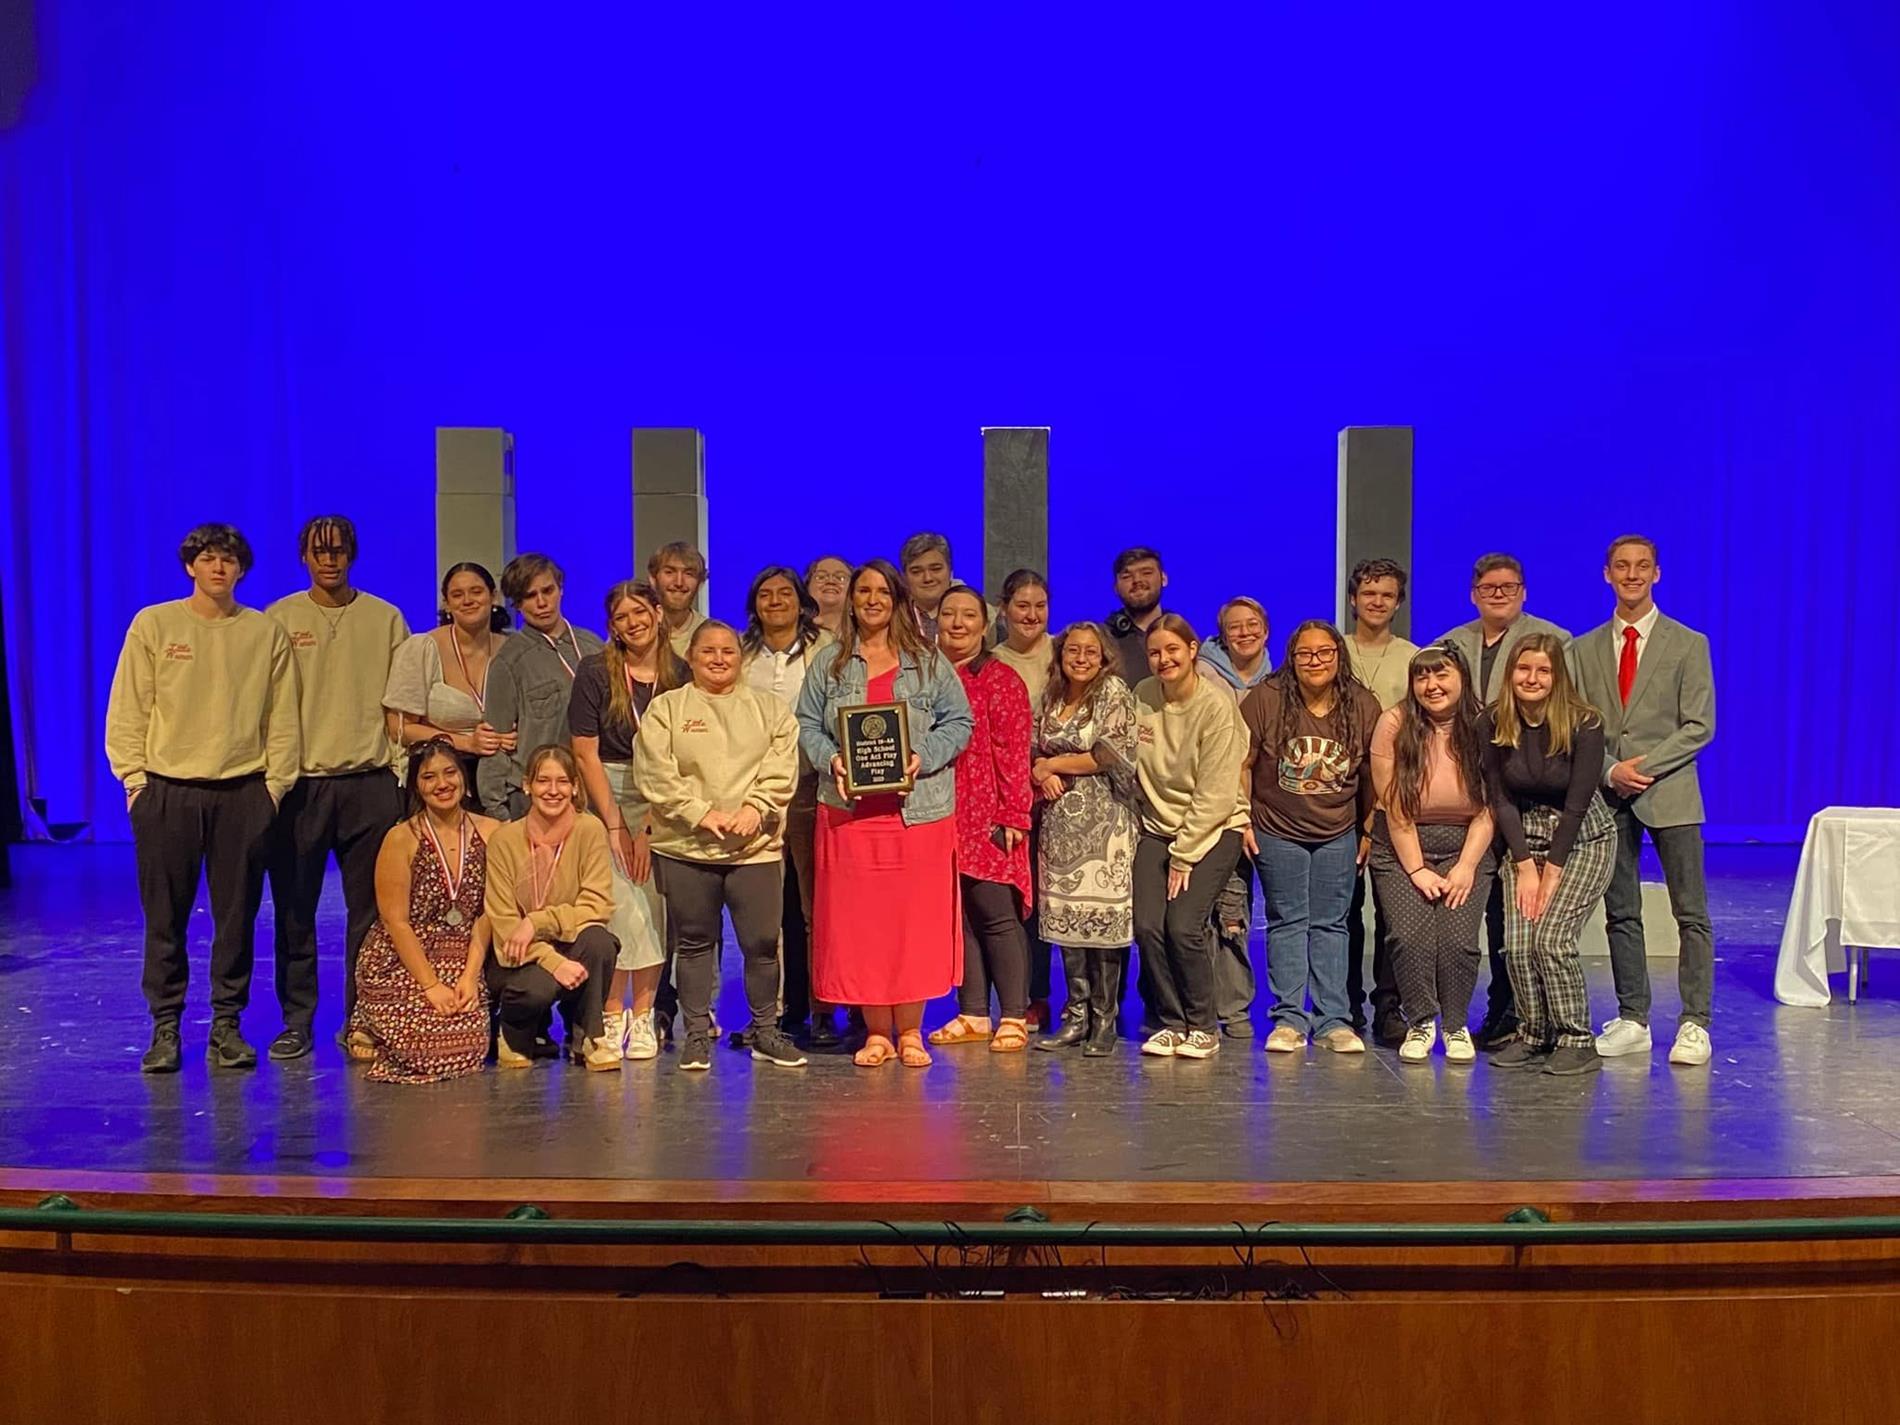 One Act Play team advances to Area